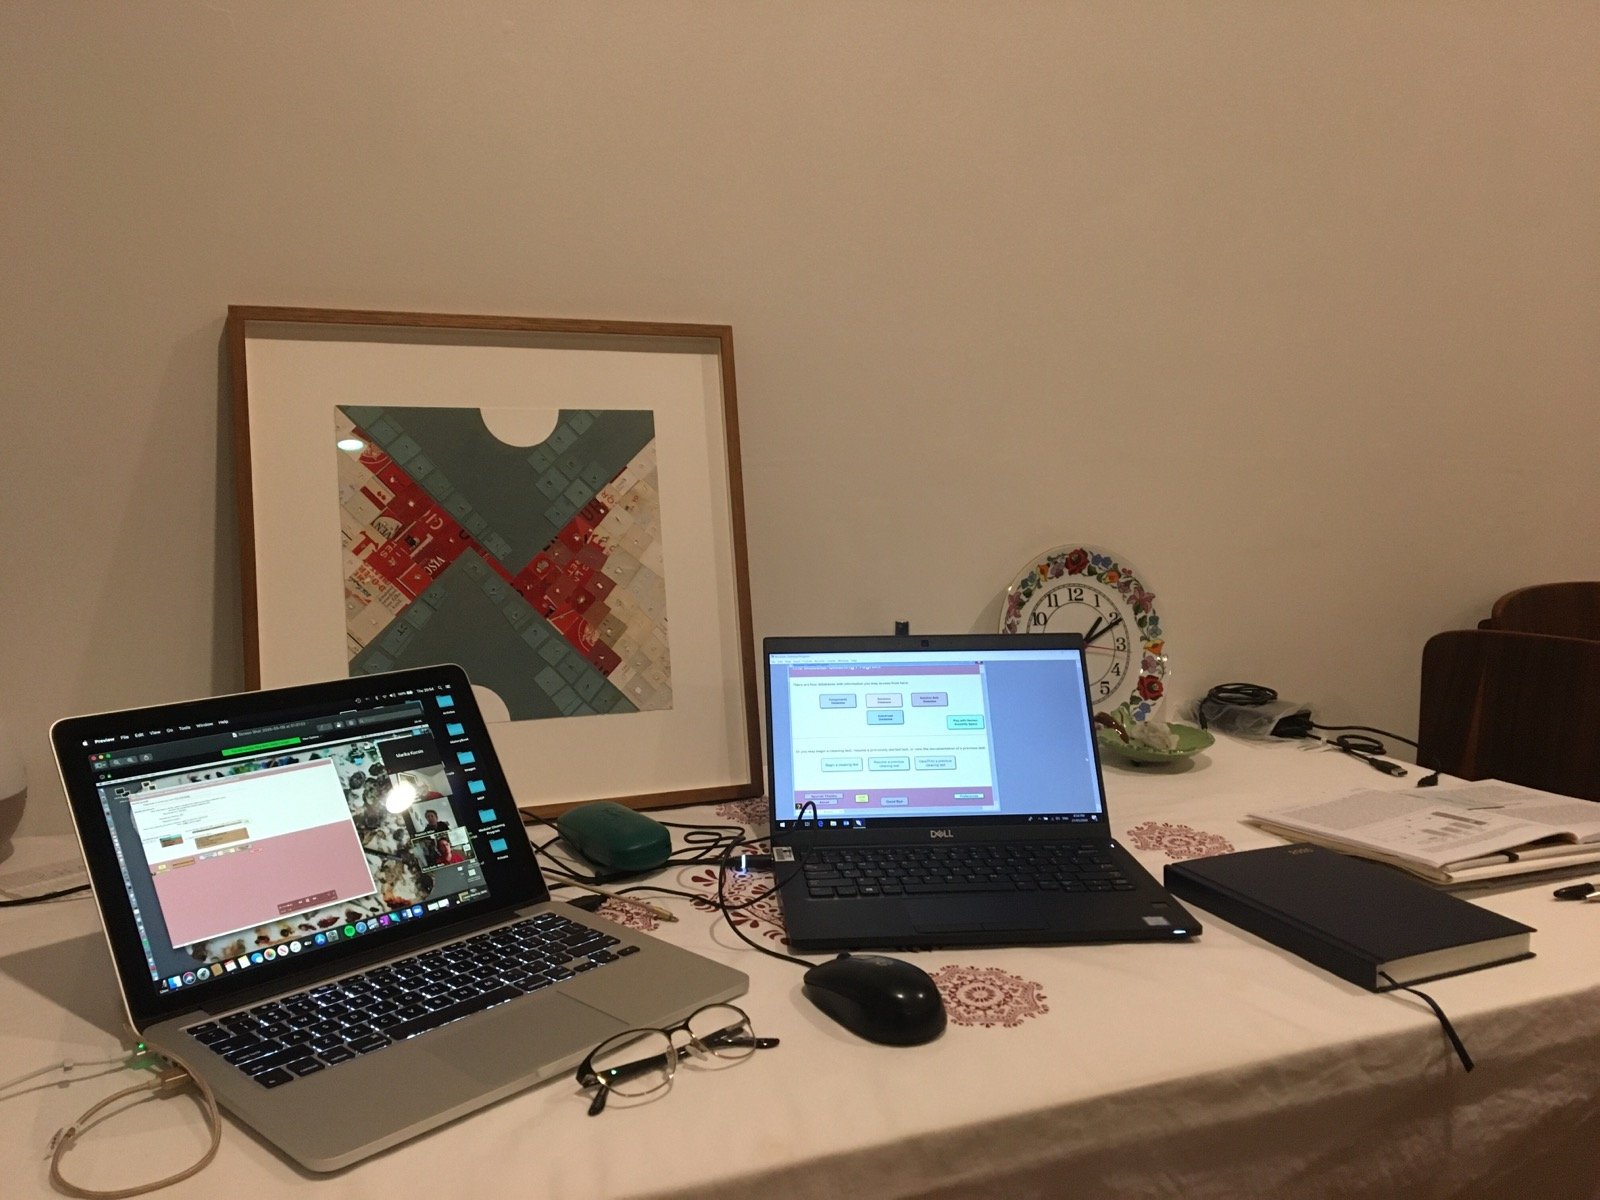 laptops on table